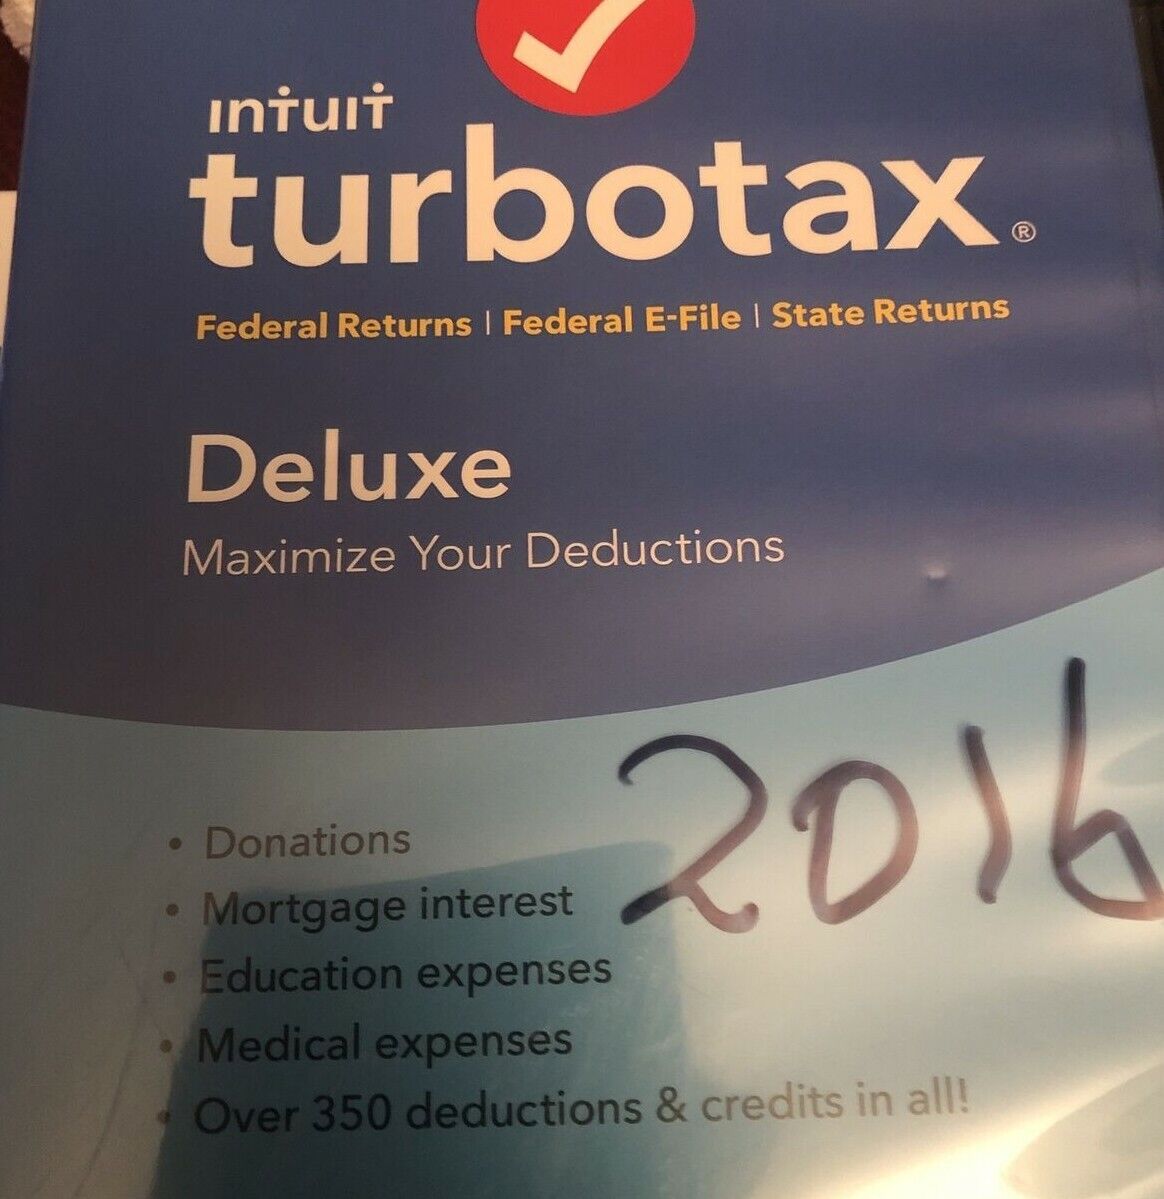 Intuit Turbo Tax Deluxe 2016 - Federal & State E-file Licenses - Tax Preparation